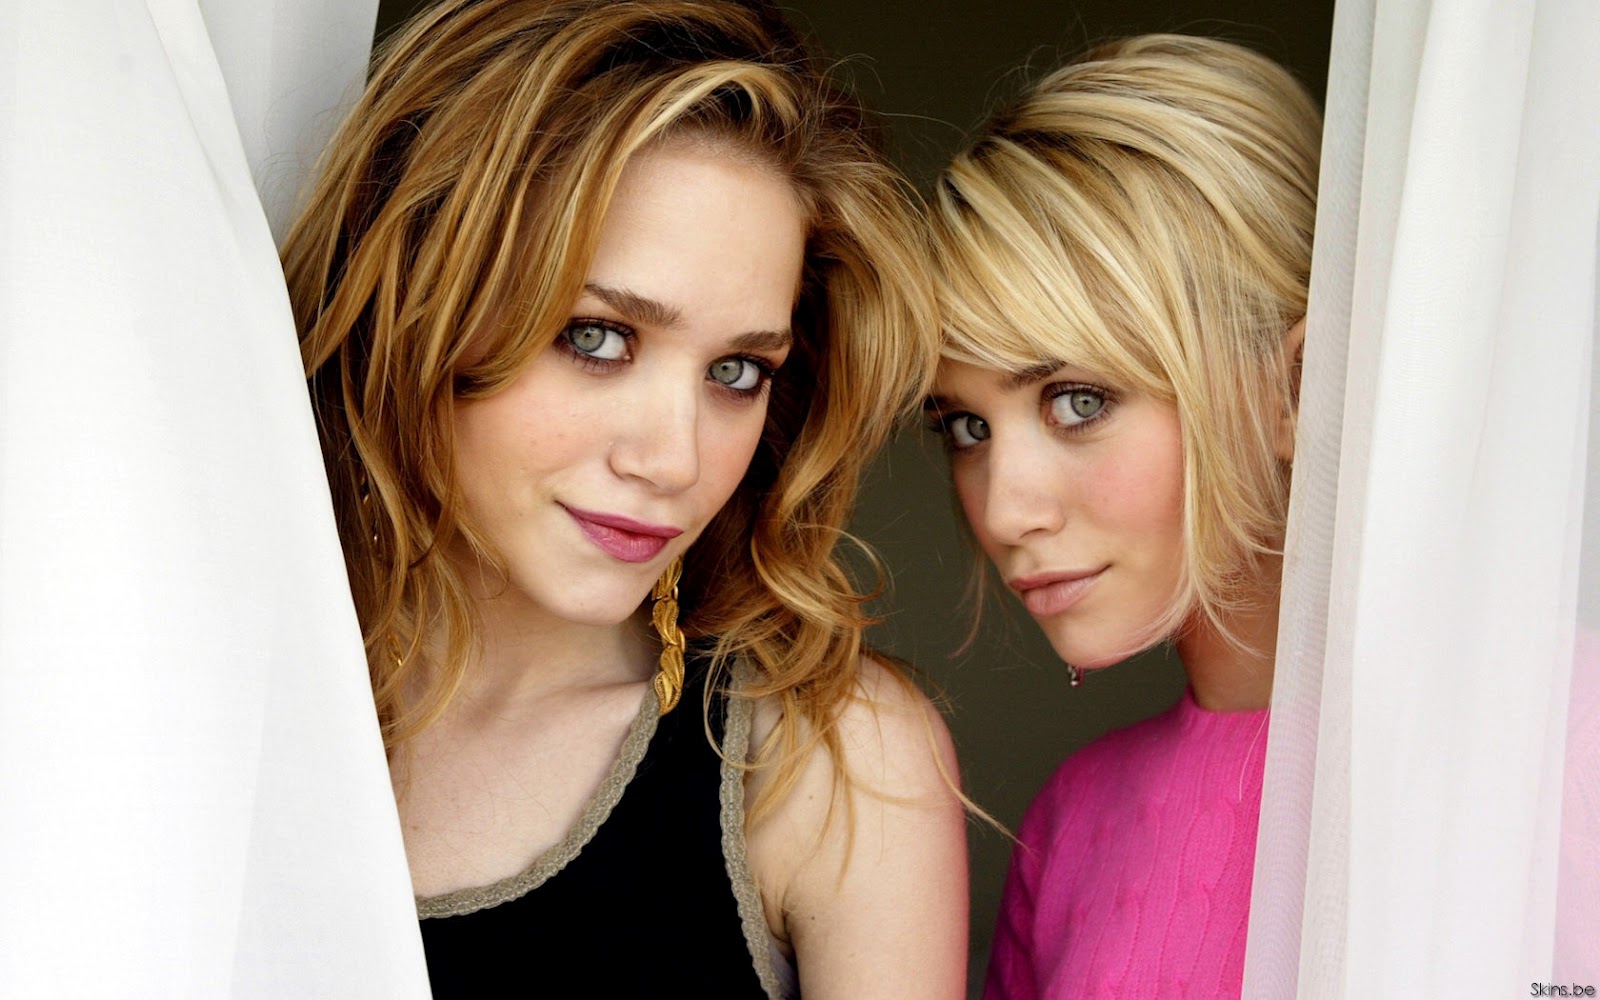 Adult pics of the olsen twins